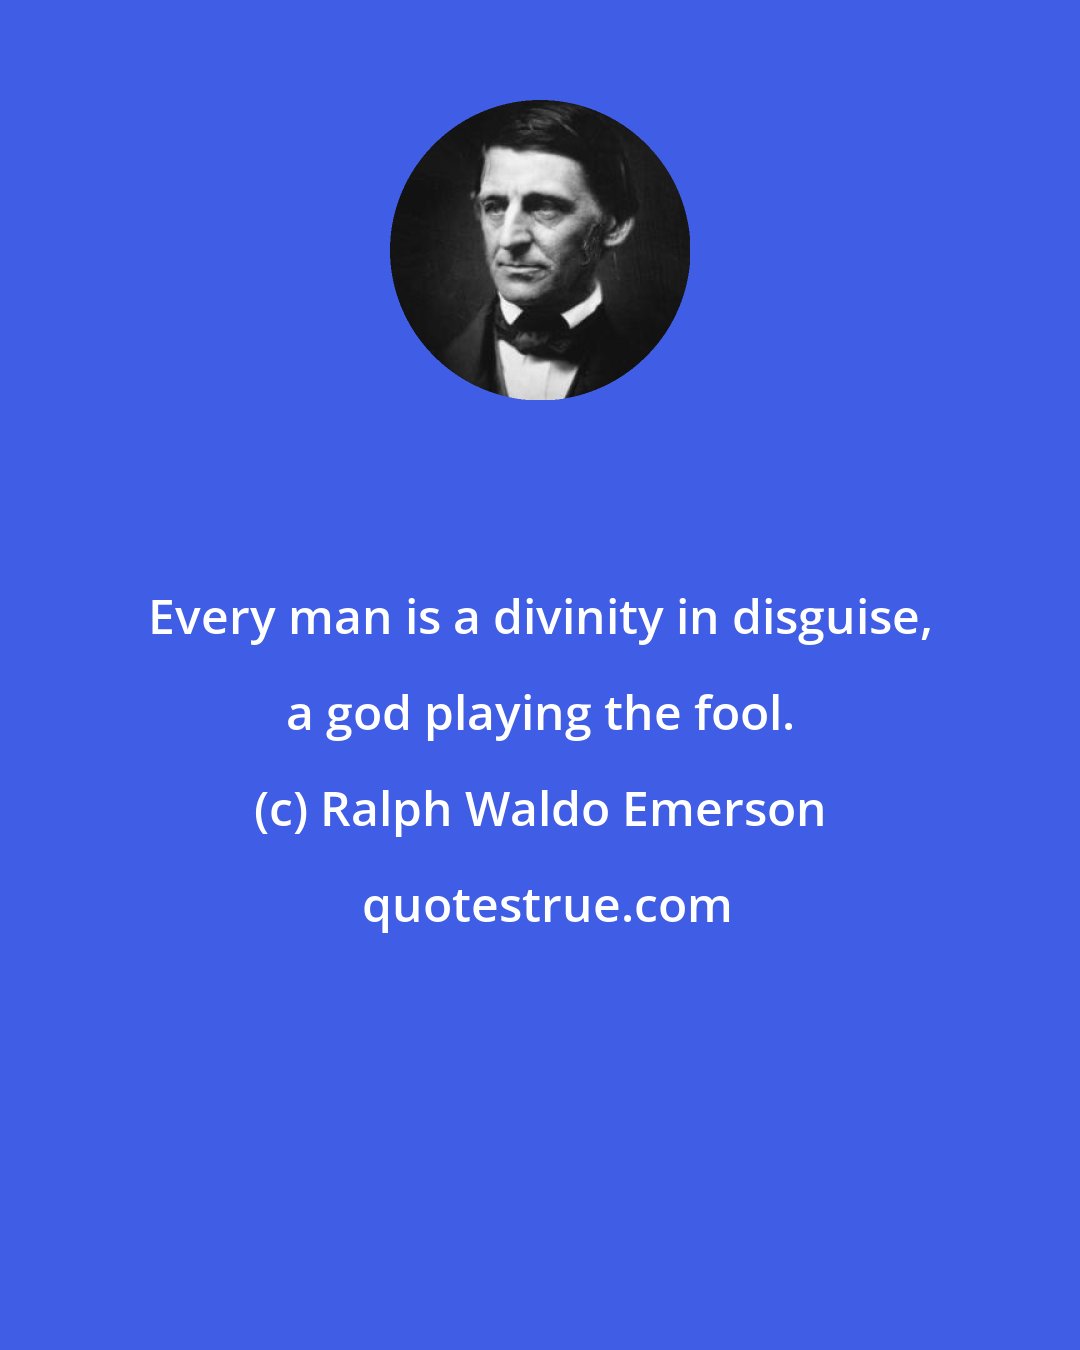 Ralph Waldo Emerson: Every man is a divinity in disguise, a god playing the fool.